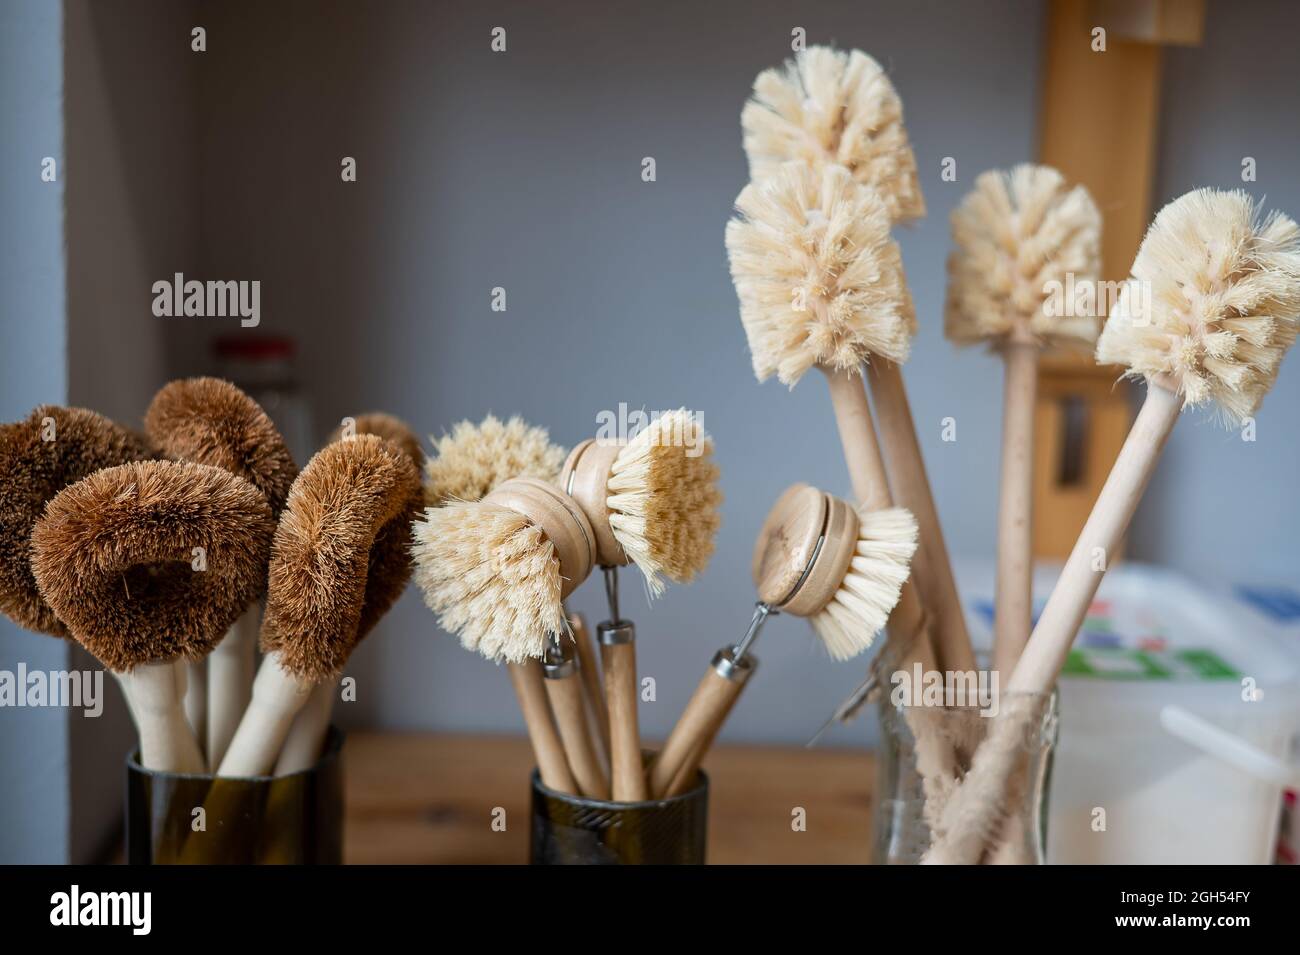 Eco brushes made of coconut. Household products without plastic waste in an eco friendly store Stock Photo